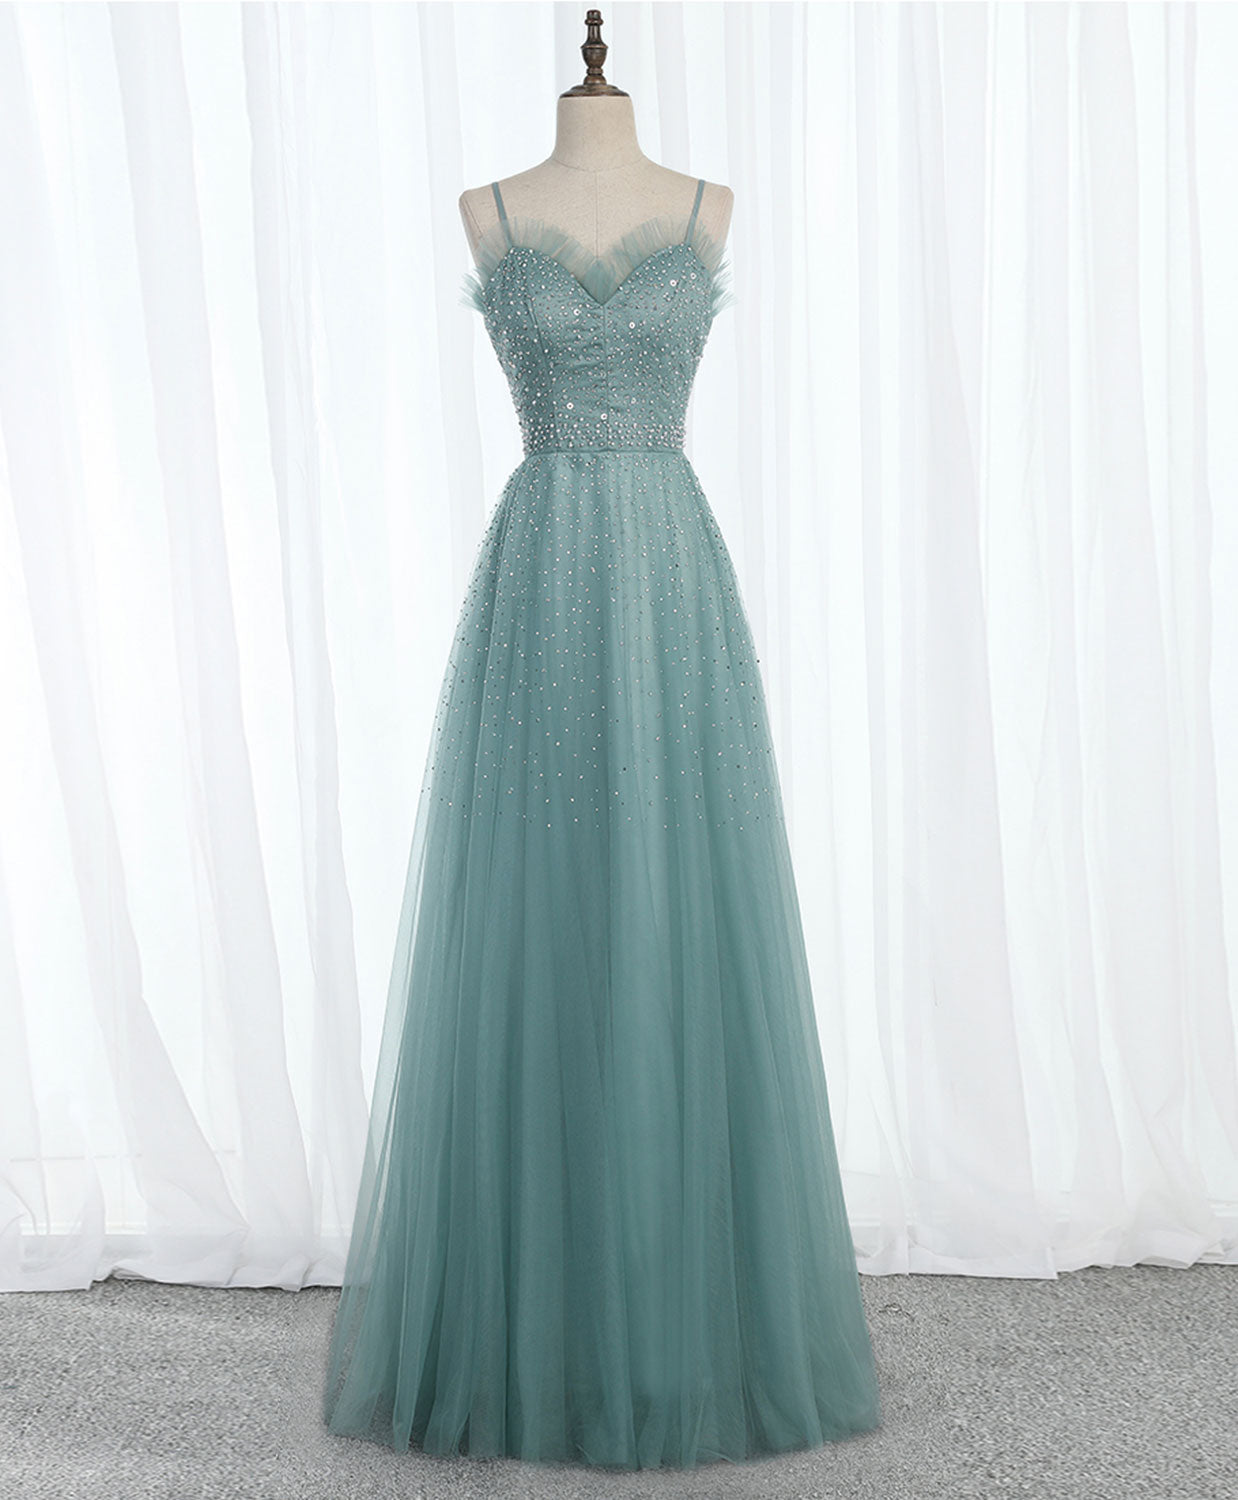 Homecoming Dresses 18 Year Old, Green Sweetheart Neck Tulle Sequin Long Prom Dress, Tulle Graduation Dress